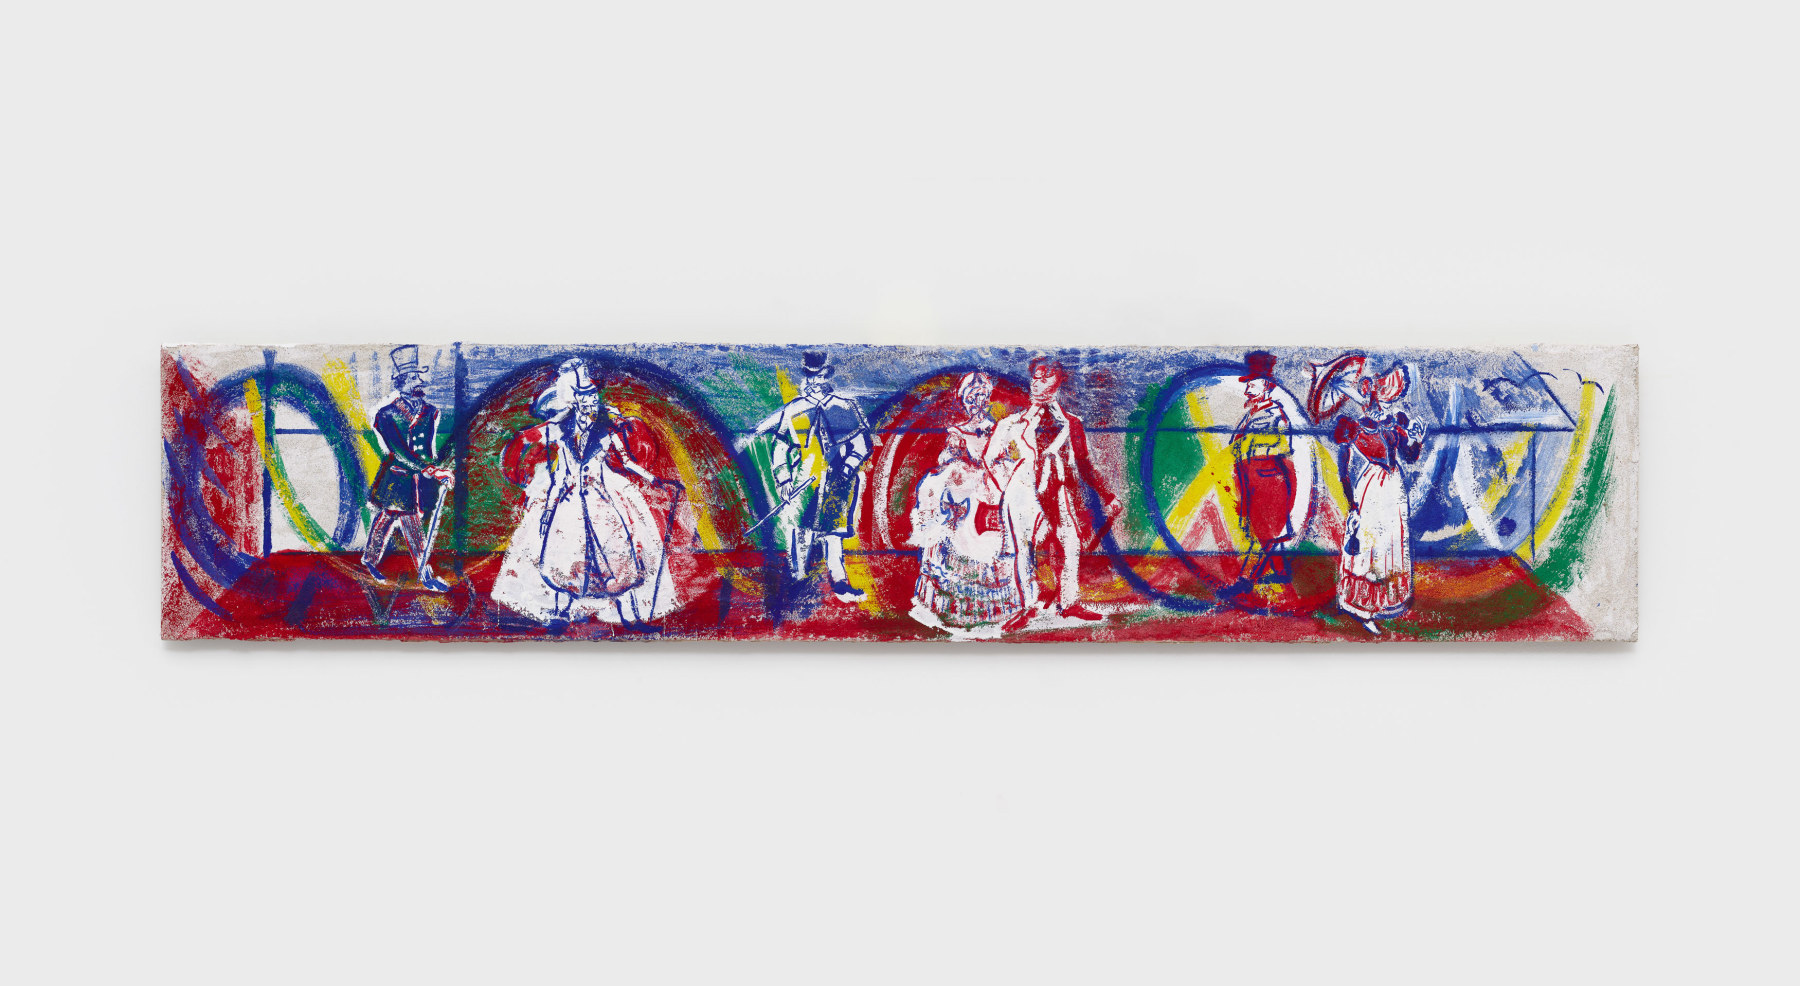 Anna Rosen
The Plank, 2020
casein, lime putty, and pigment on lime plaster
12 x 60 in (30.5 x 152.4 cm)
AR113